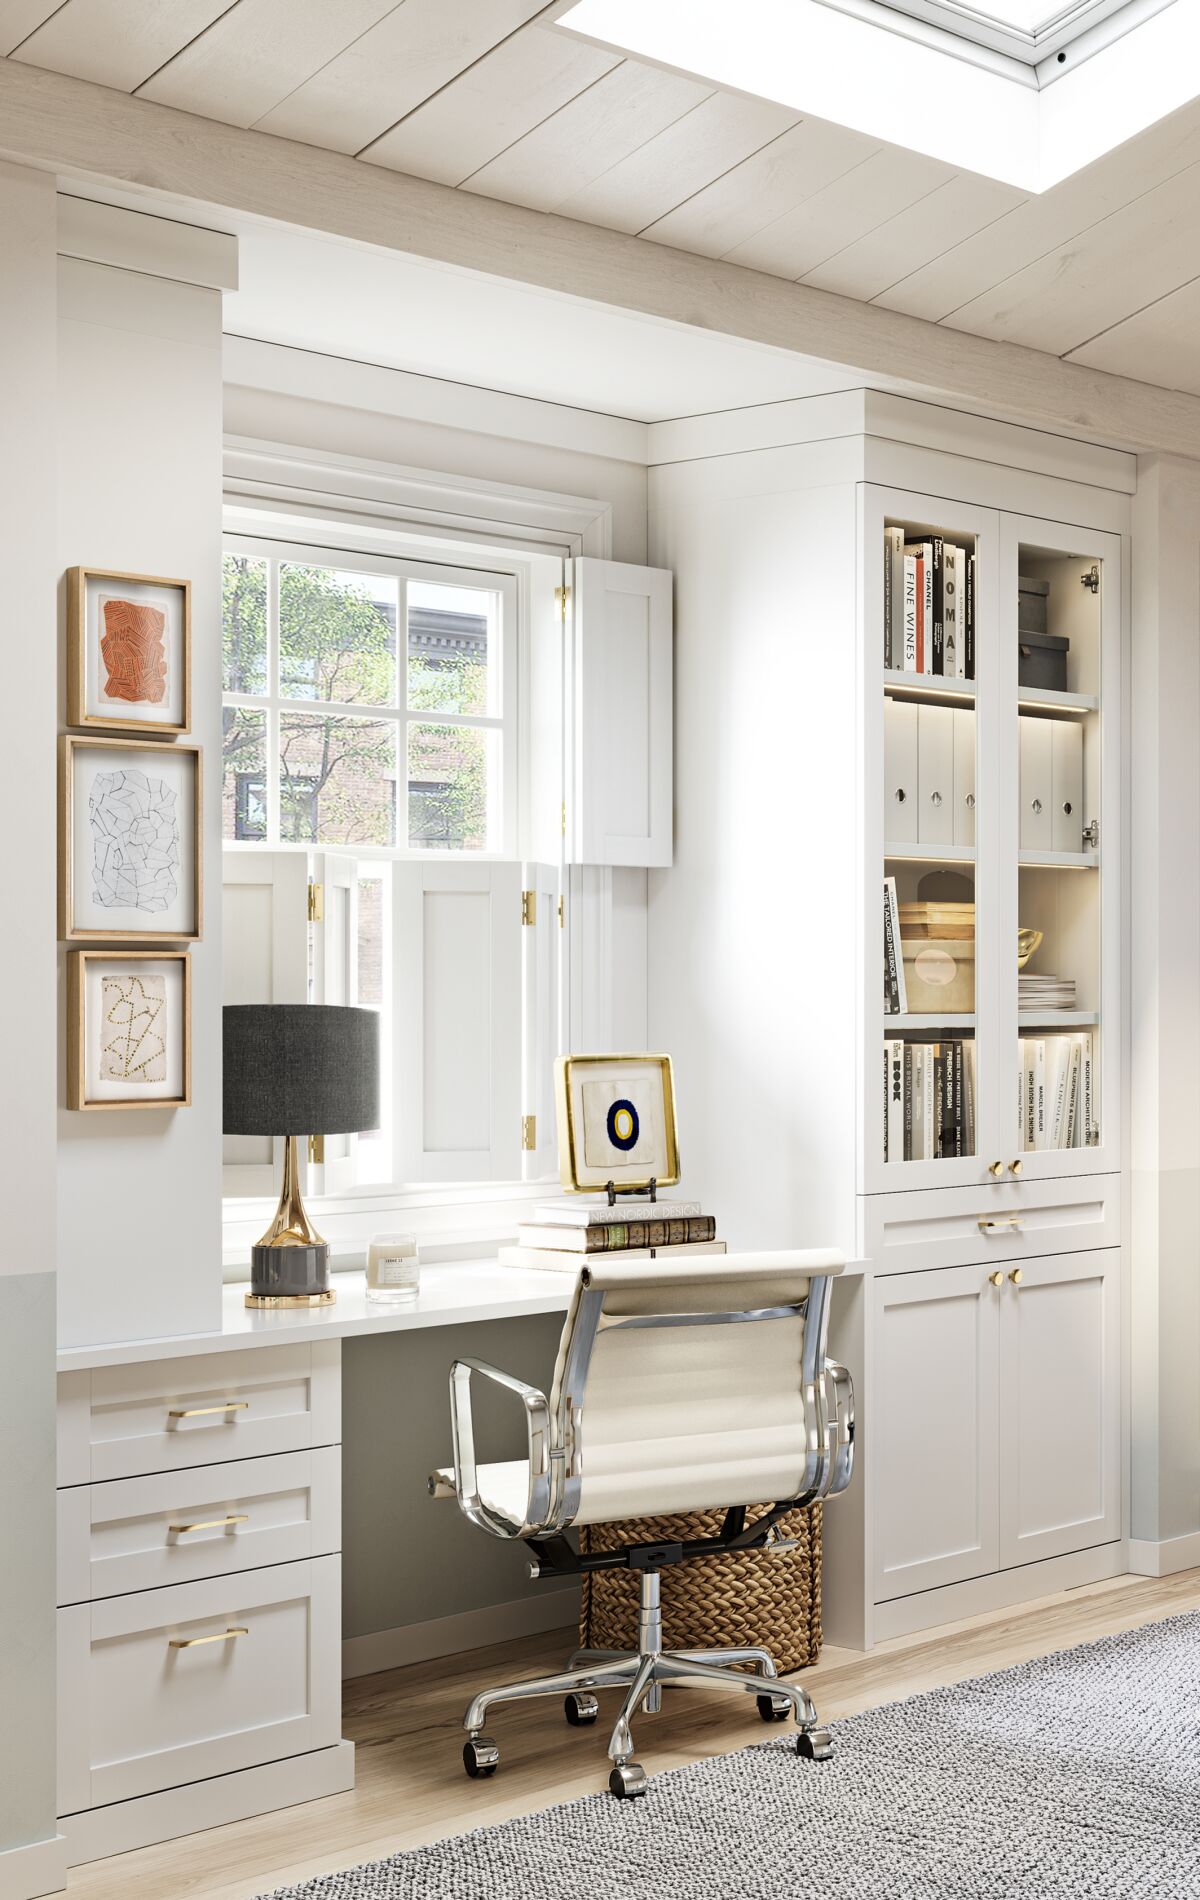 Natural light and a stylish glass cabinet are part of a home office solution from California Closets.